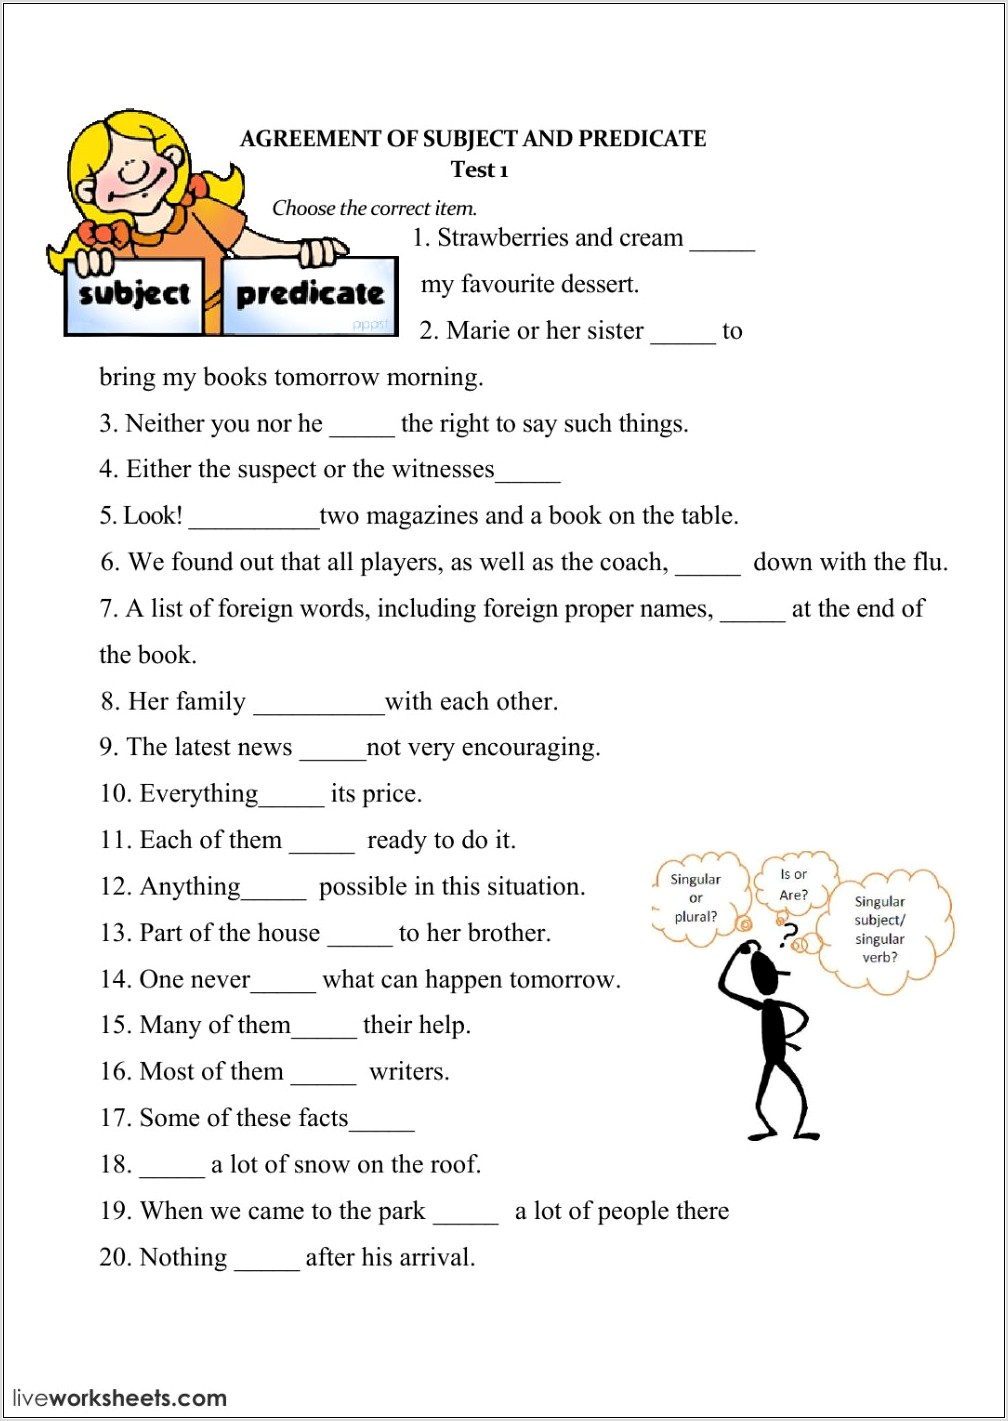 Subject Verb Agreement Worksheet Part 1 Answers